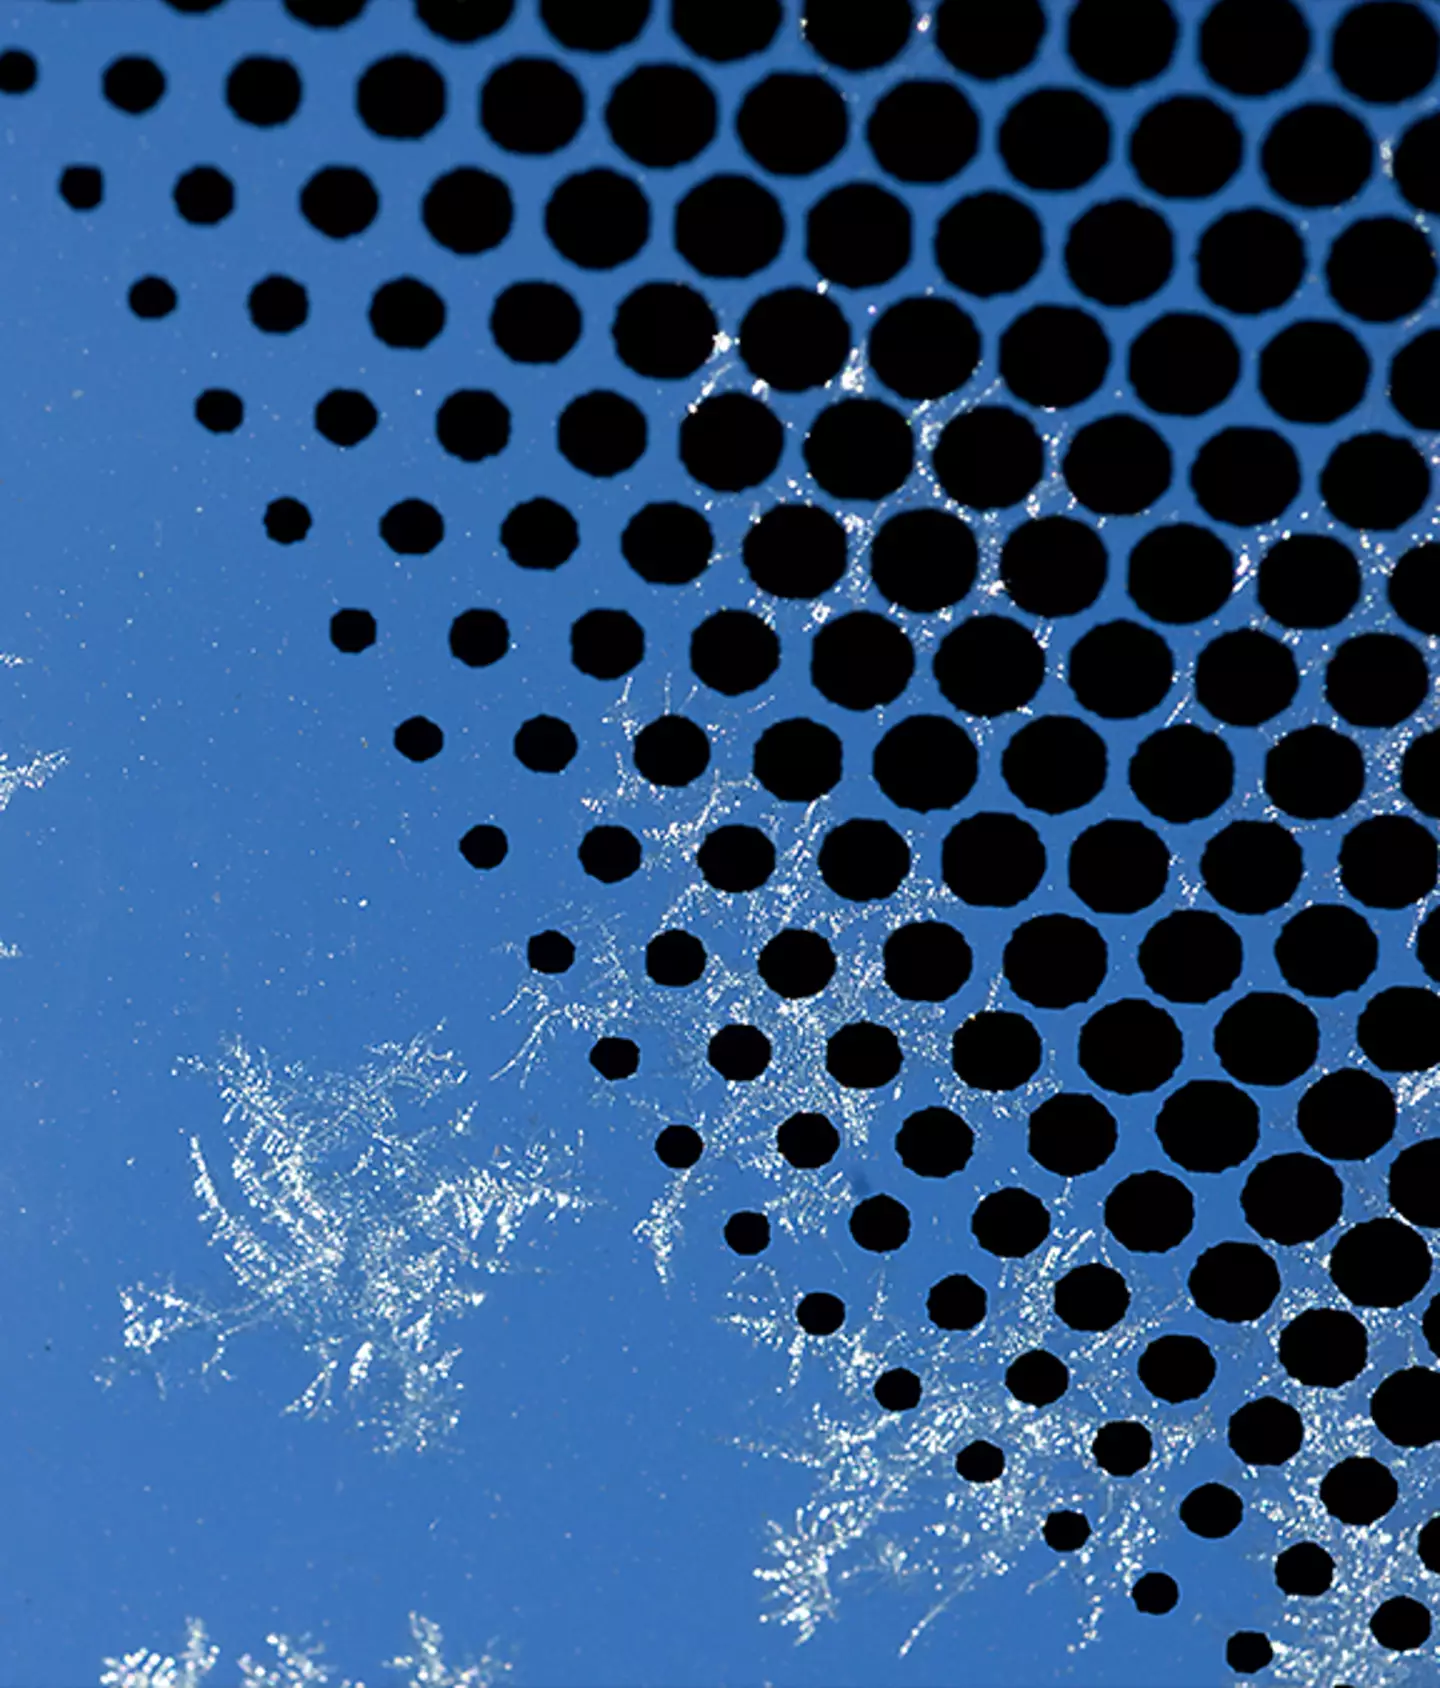 The frit is baked onto the surface of the windscreen /John Nordell/Getty Images